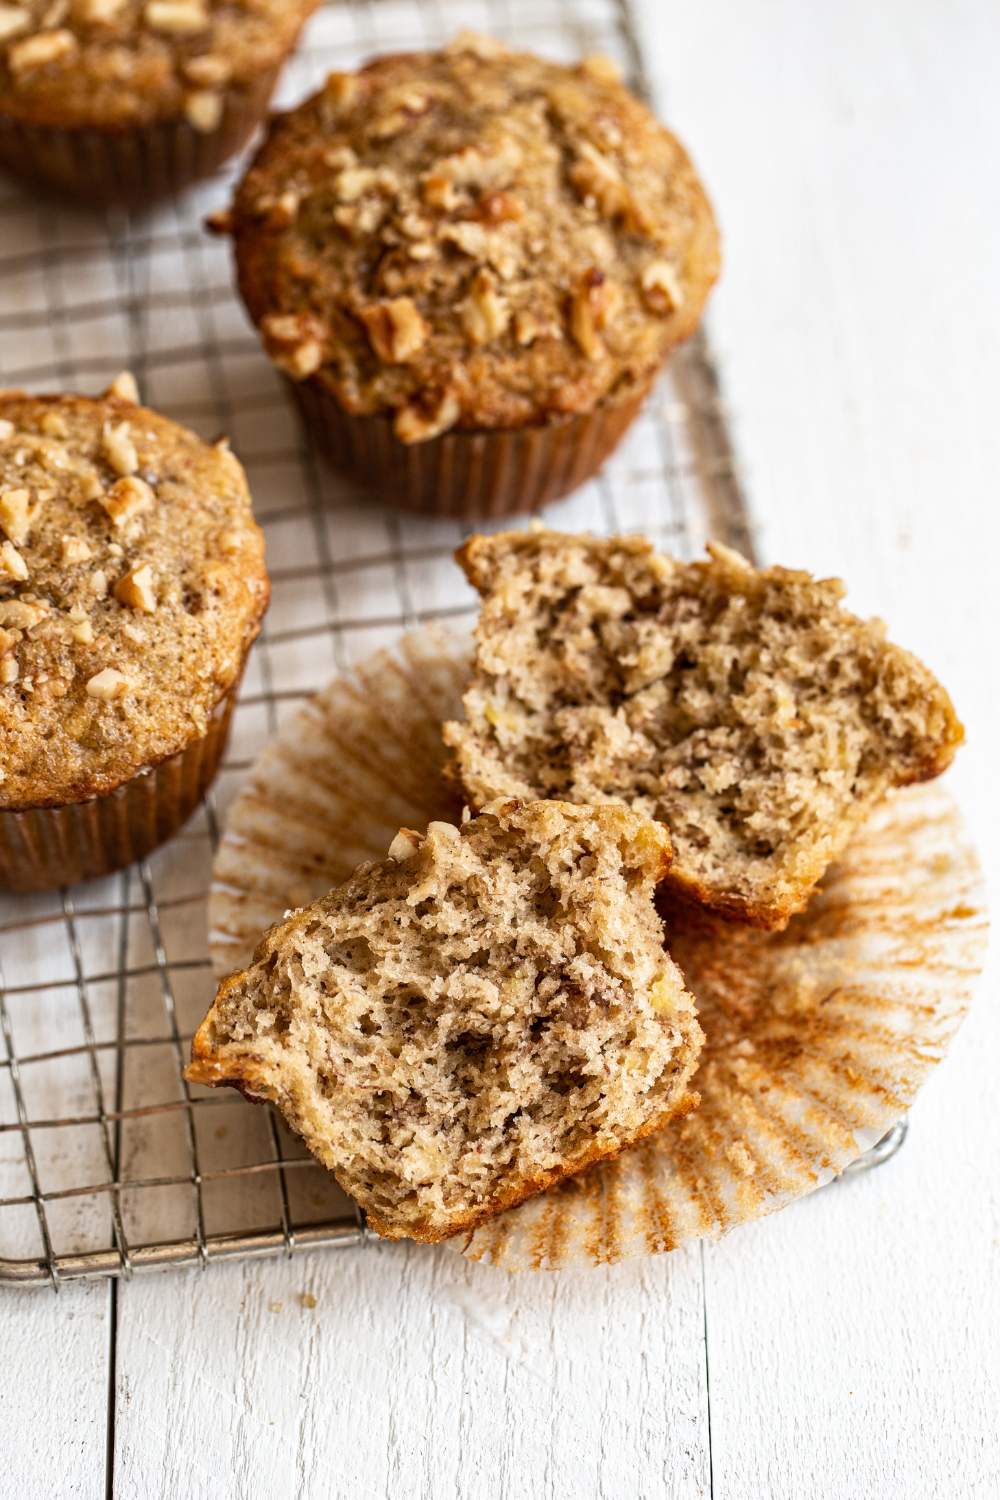 banana nut muffin broken in half to see how moist it is